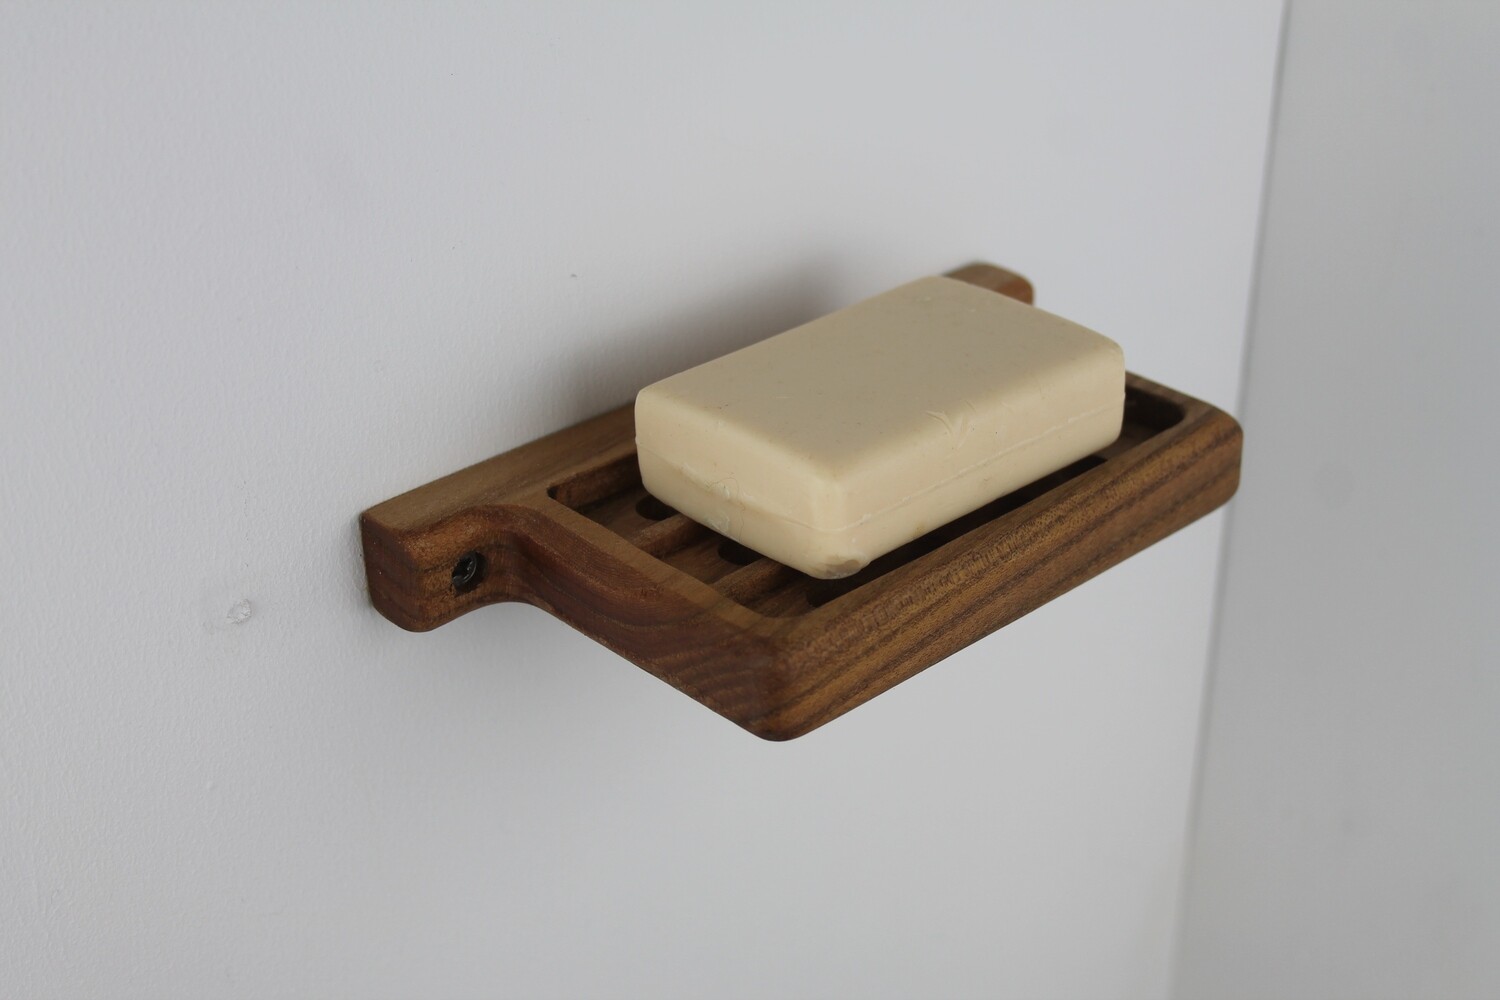 Wall Mounted Teak Soap Dish, Wooden Soap Holder